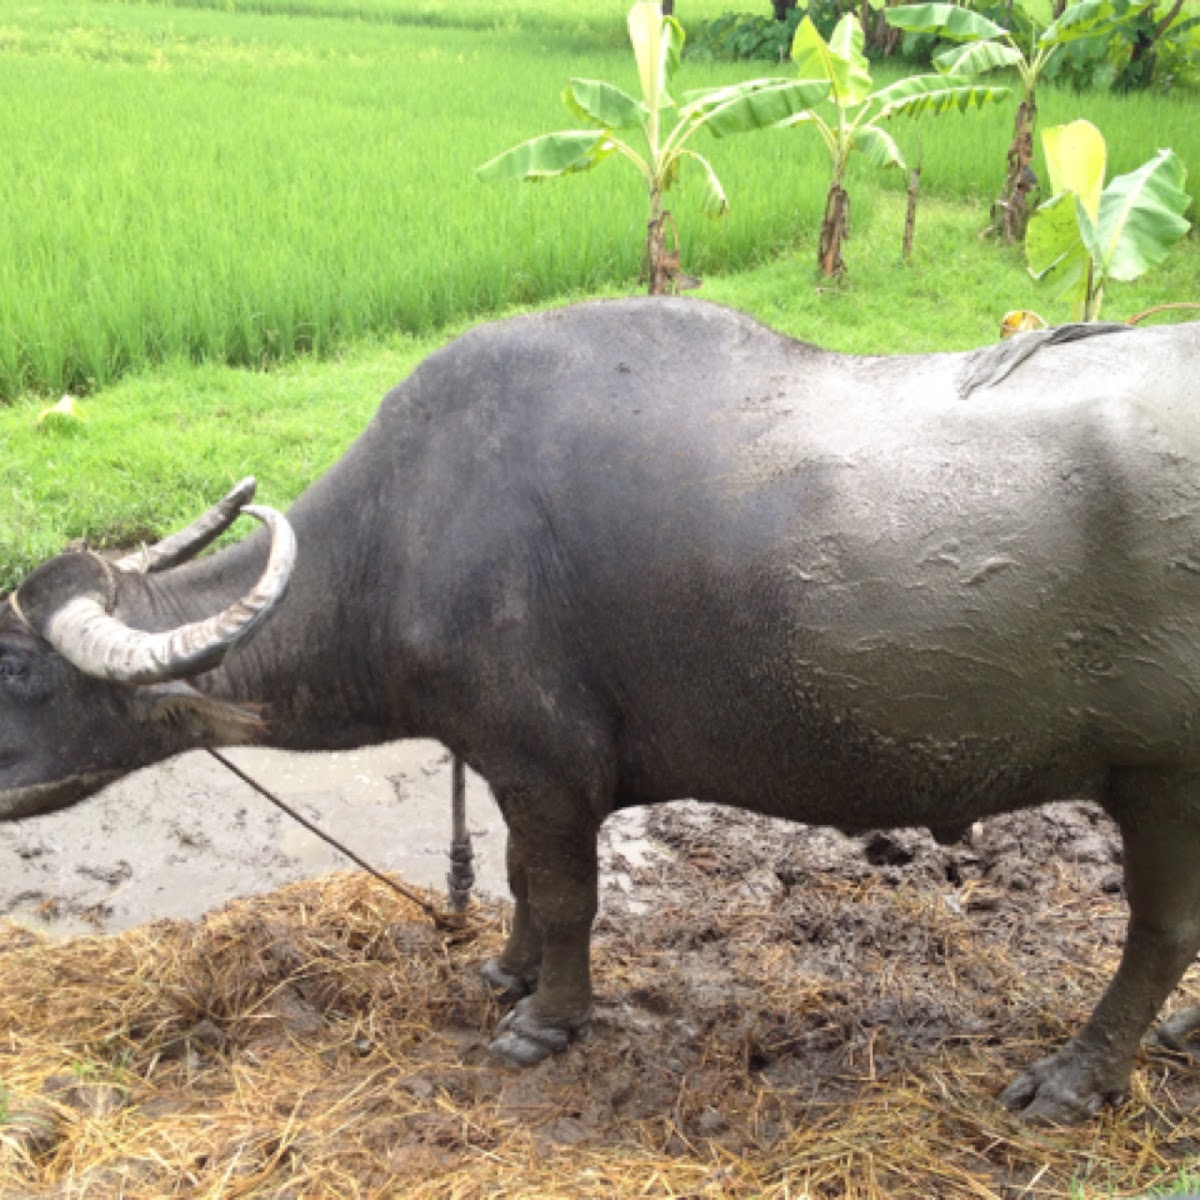 Water Buffalo and Cow